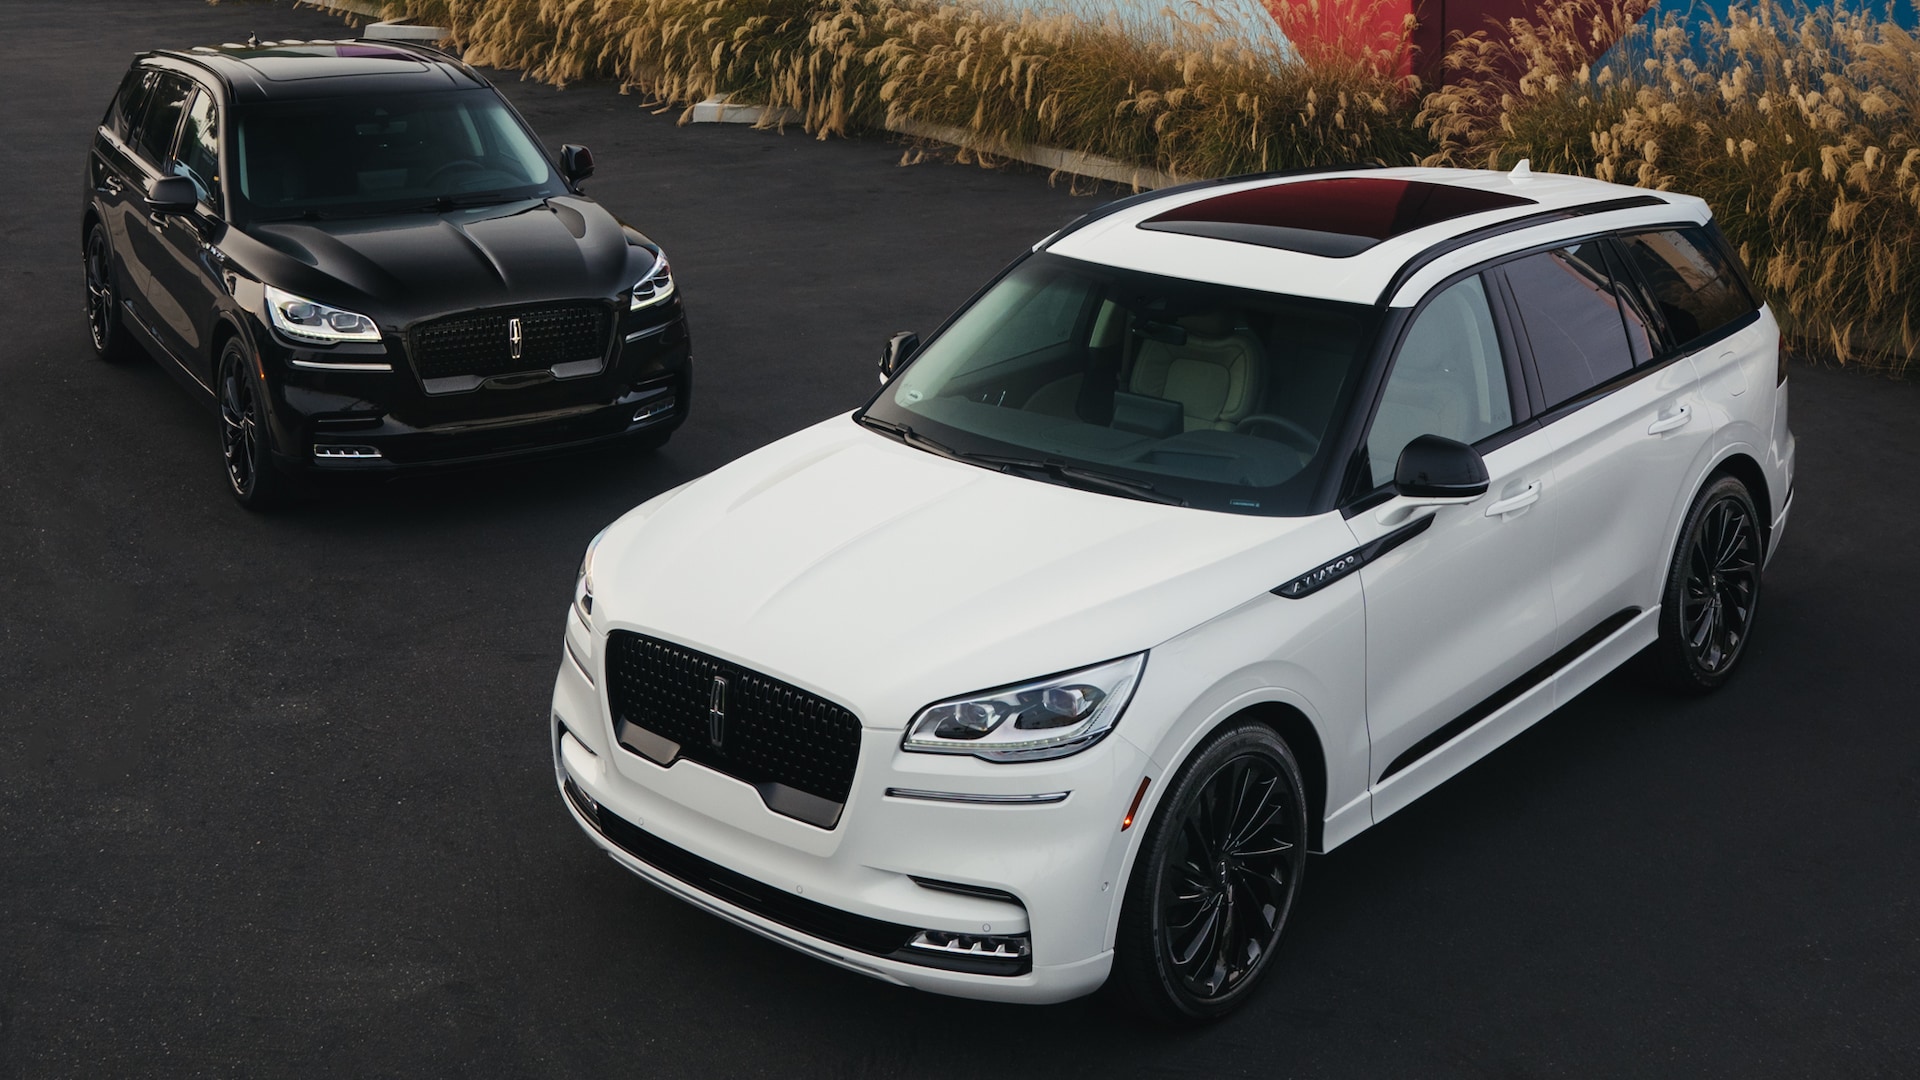 2022 Lincoln Aviator Prices, Reviews, and Photos - MotorTrend